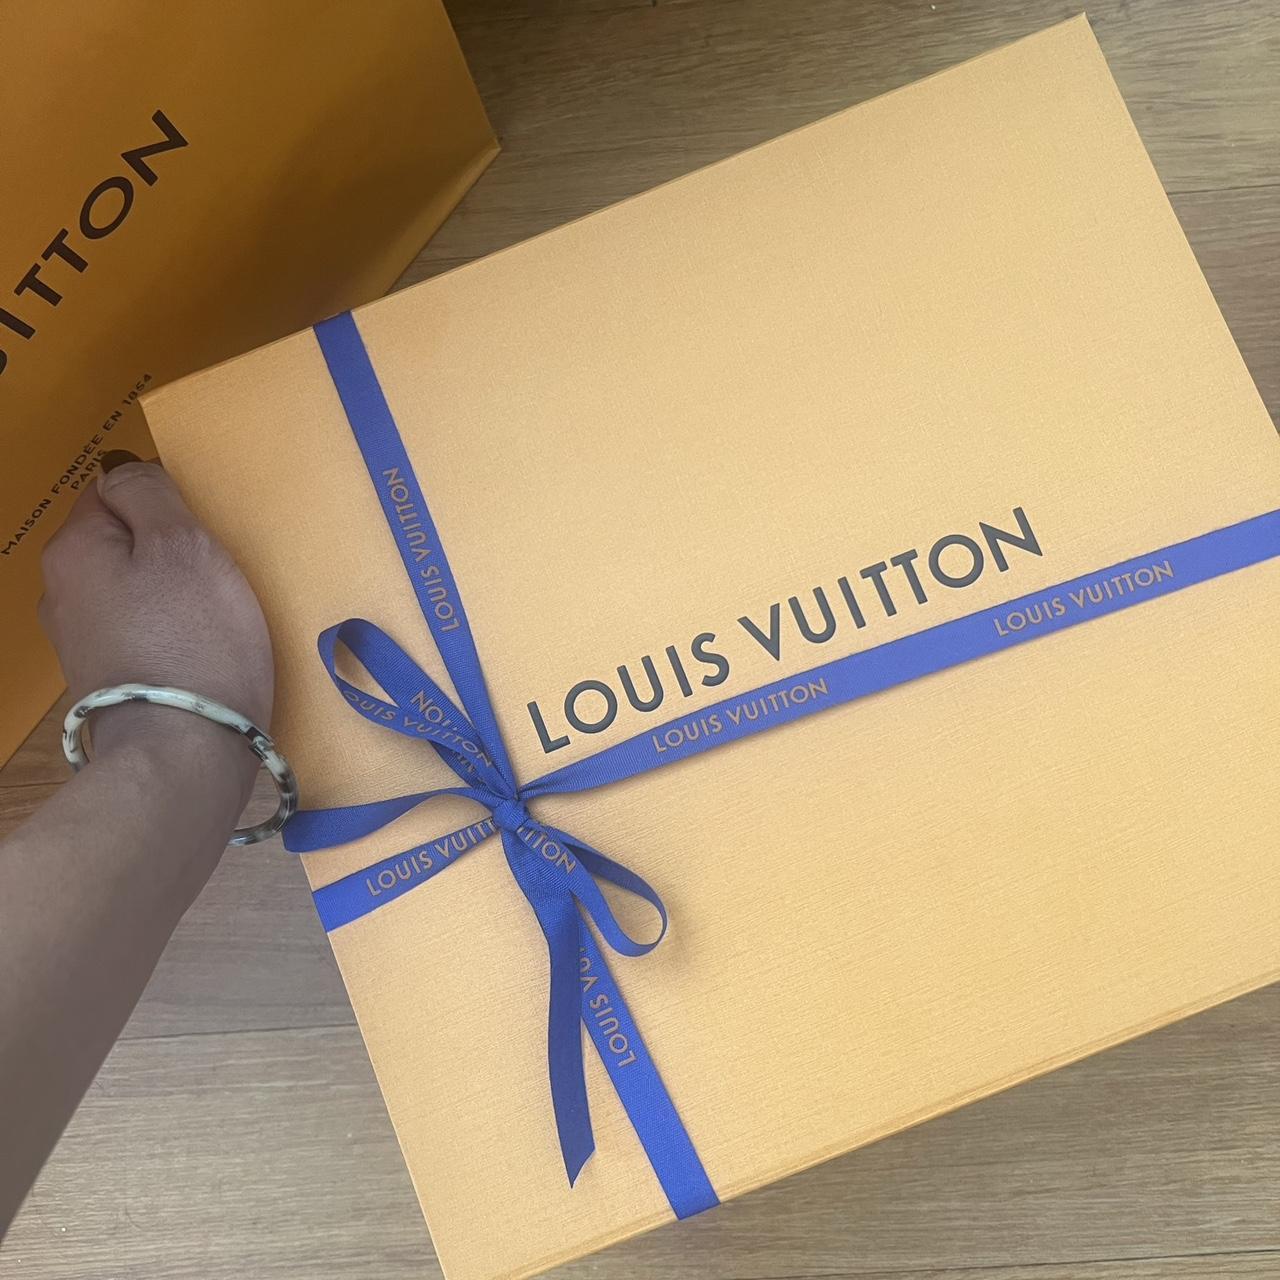 Louis Vuitton Yellow Gift Wrapping Supplies